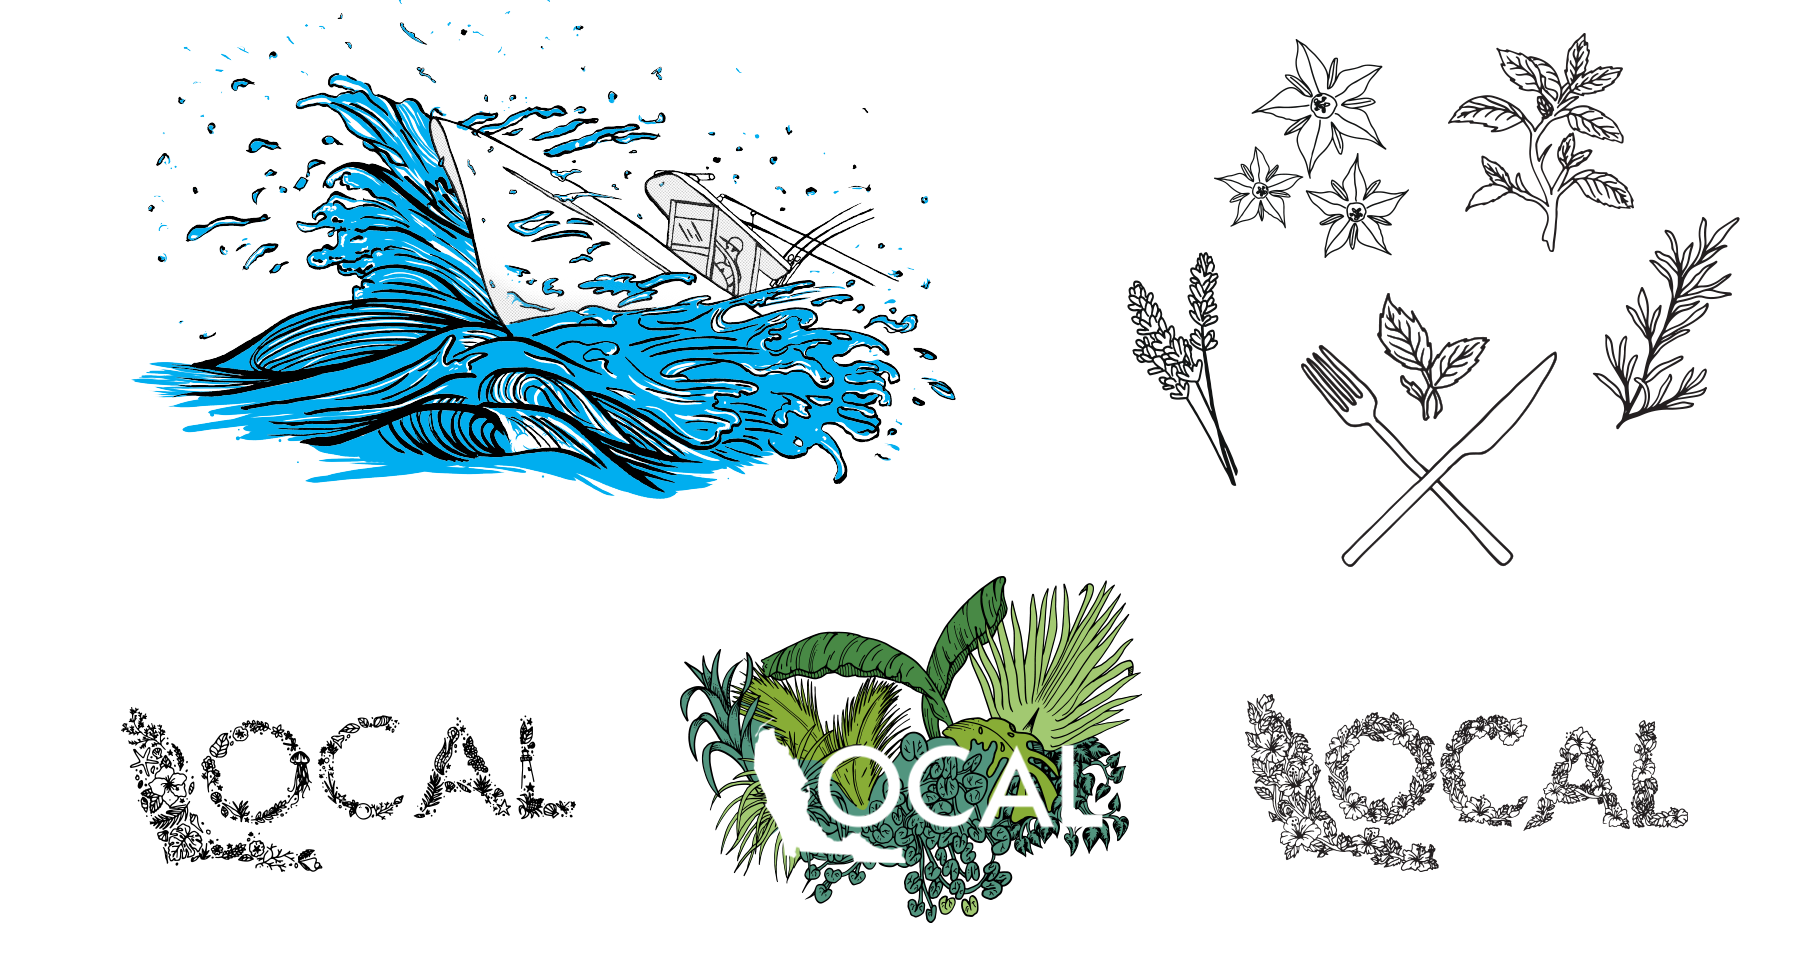 Local brand tshirt explorations including a boat and waves, palm trees, hibiscus flowers & leaves, and coral & seashell illustrations. Illustrations for Cumberland Heritage branding including lavendar, rosemary, star anise, mint, and cutlery.